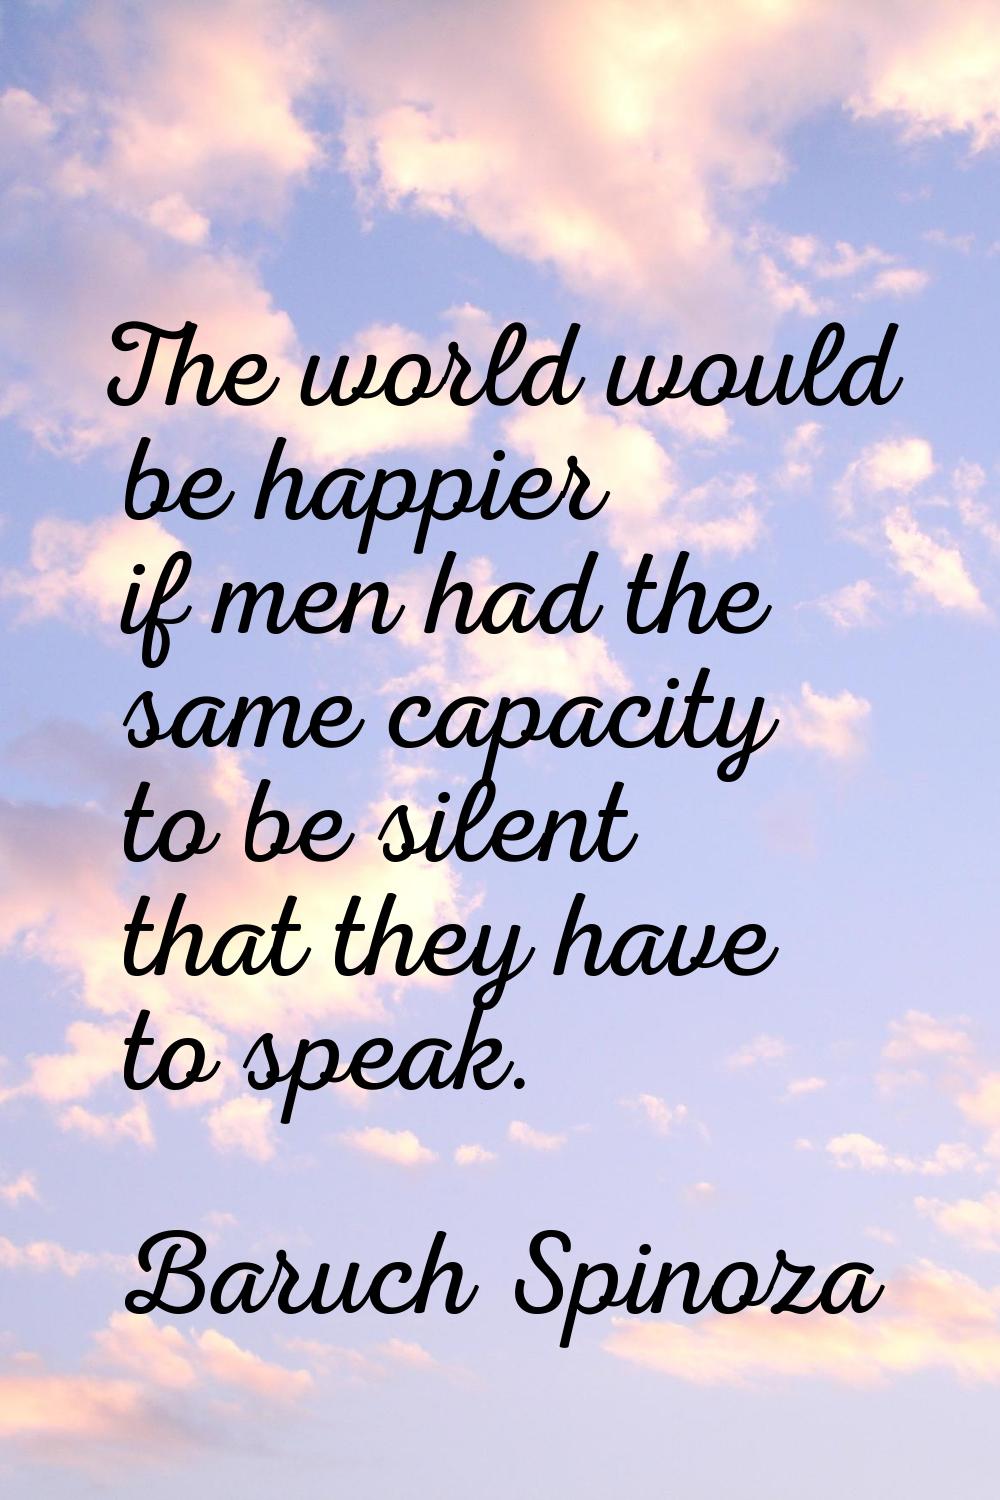 The world would be happier if men had the same capacity to be silent that they have to speak.